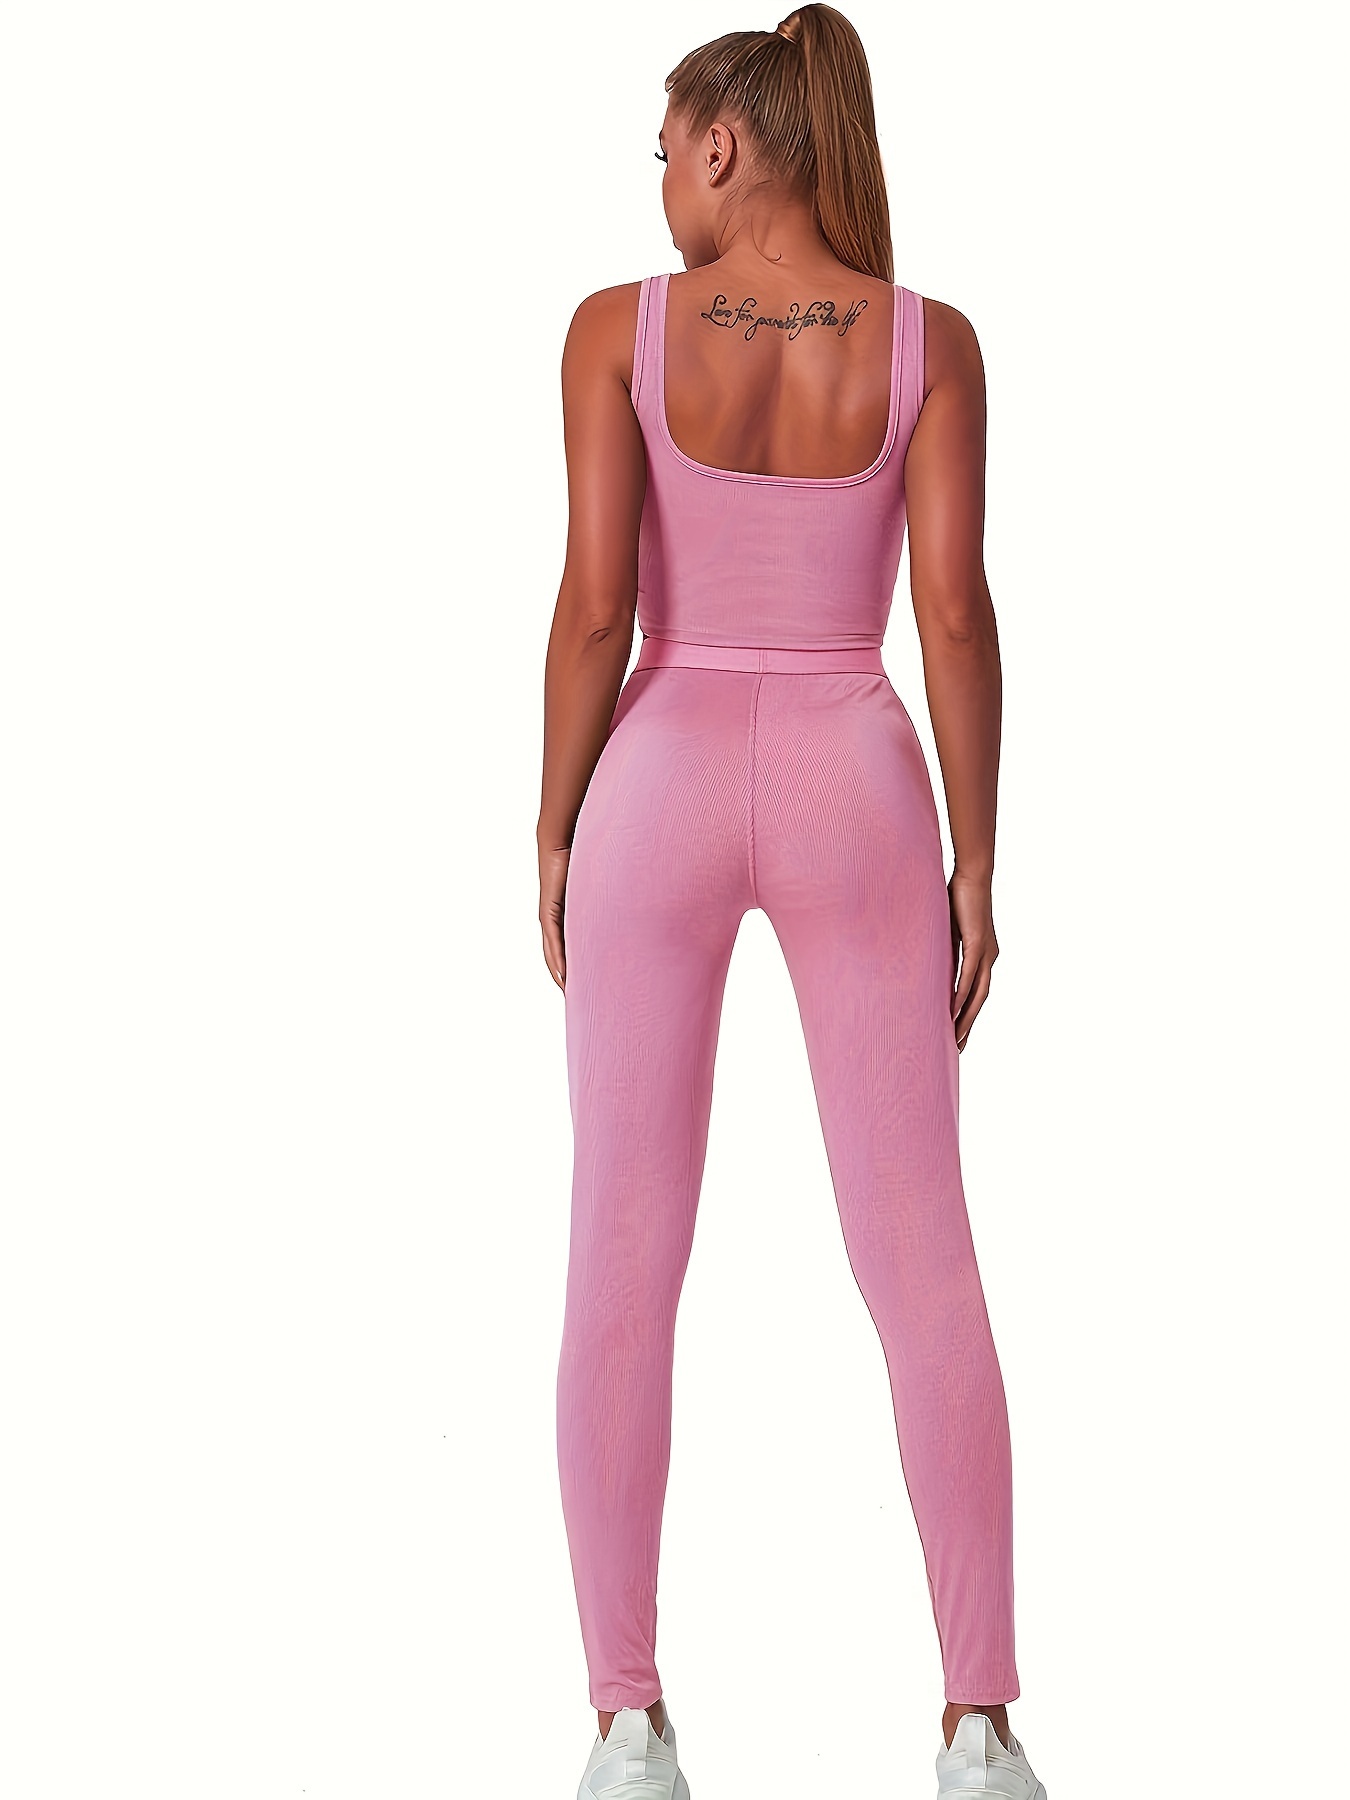 Sporty Jumpsuit Women Sportwear Push Up Gym Set Women Fitness Overalls  Lycra Sport Outfit for Woman Sportswear Yoga Clothes PINK 